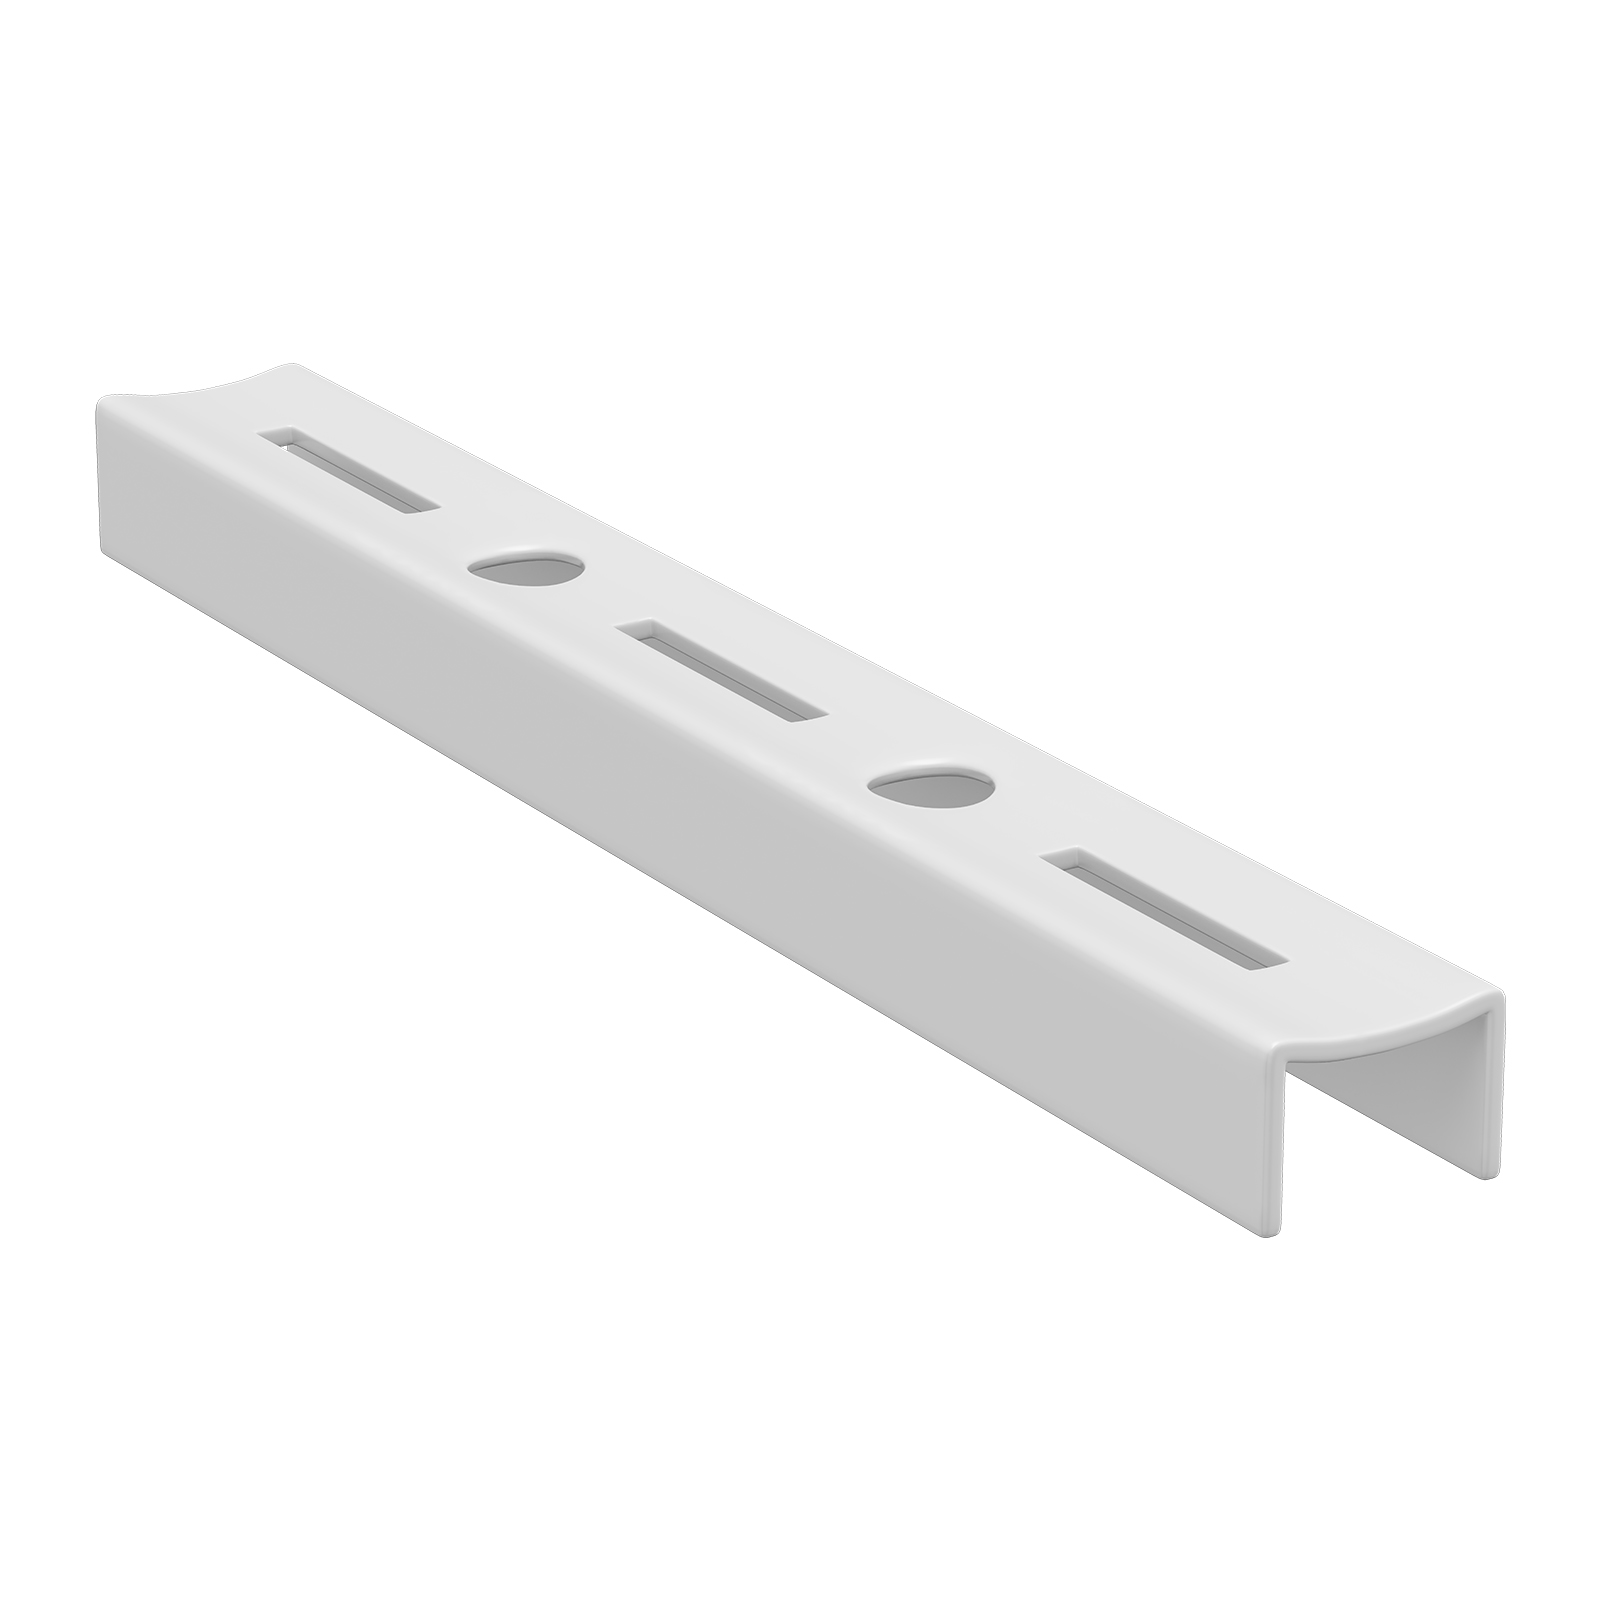 Home Solutions Single Slot Wall Strip White 145mm